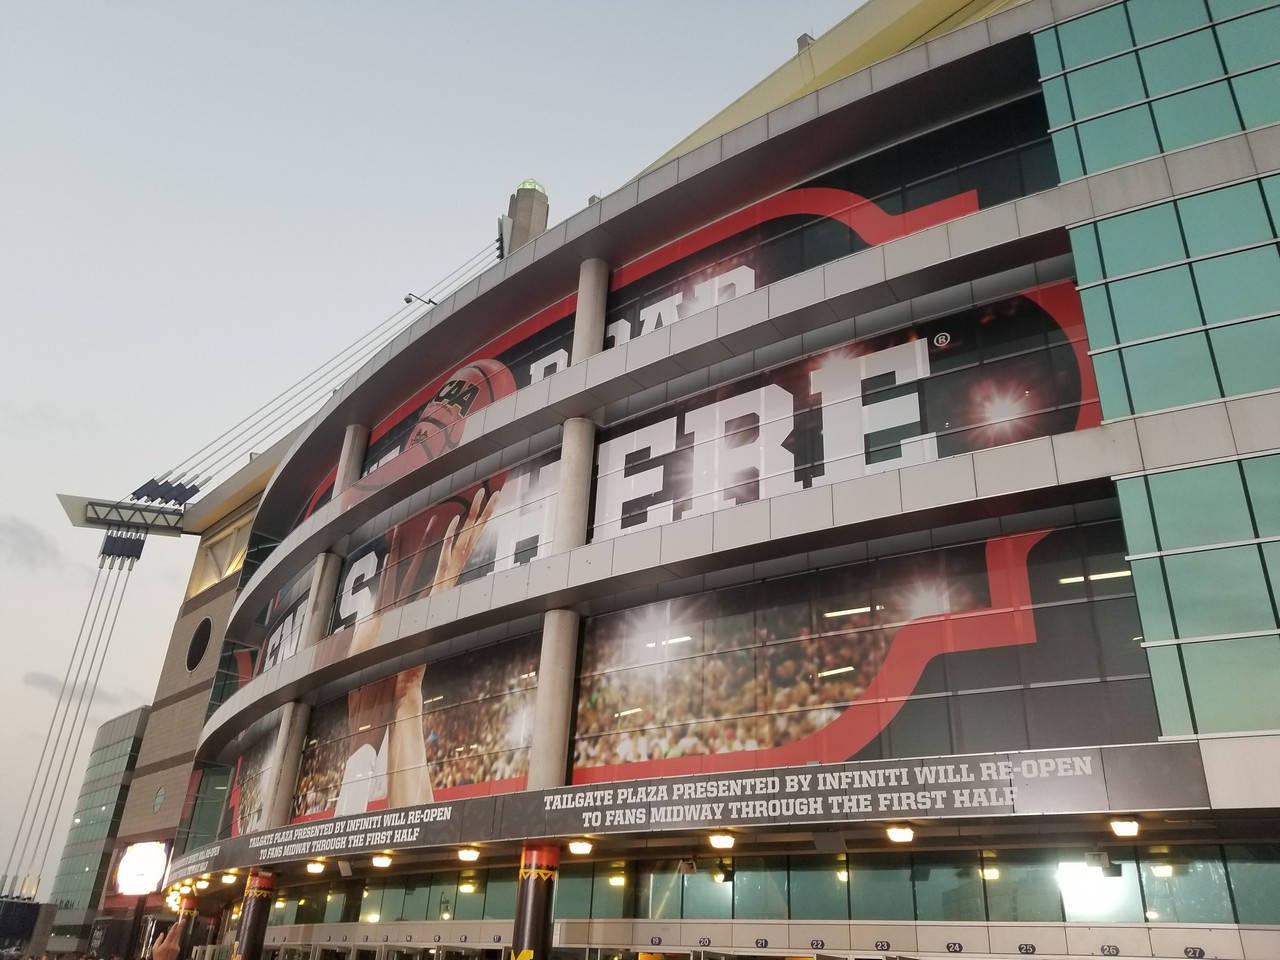 a large building with a large advertisement on the side